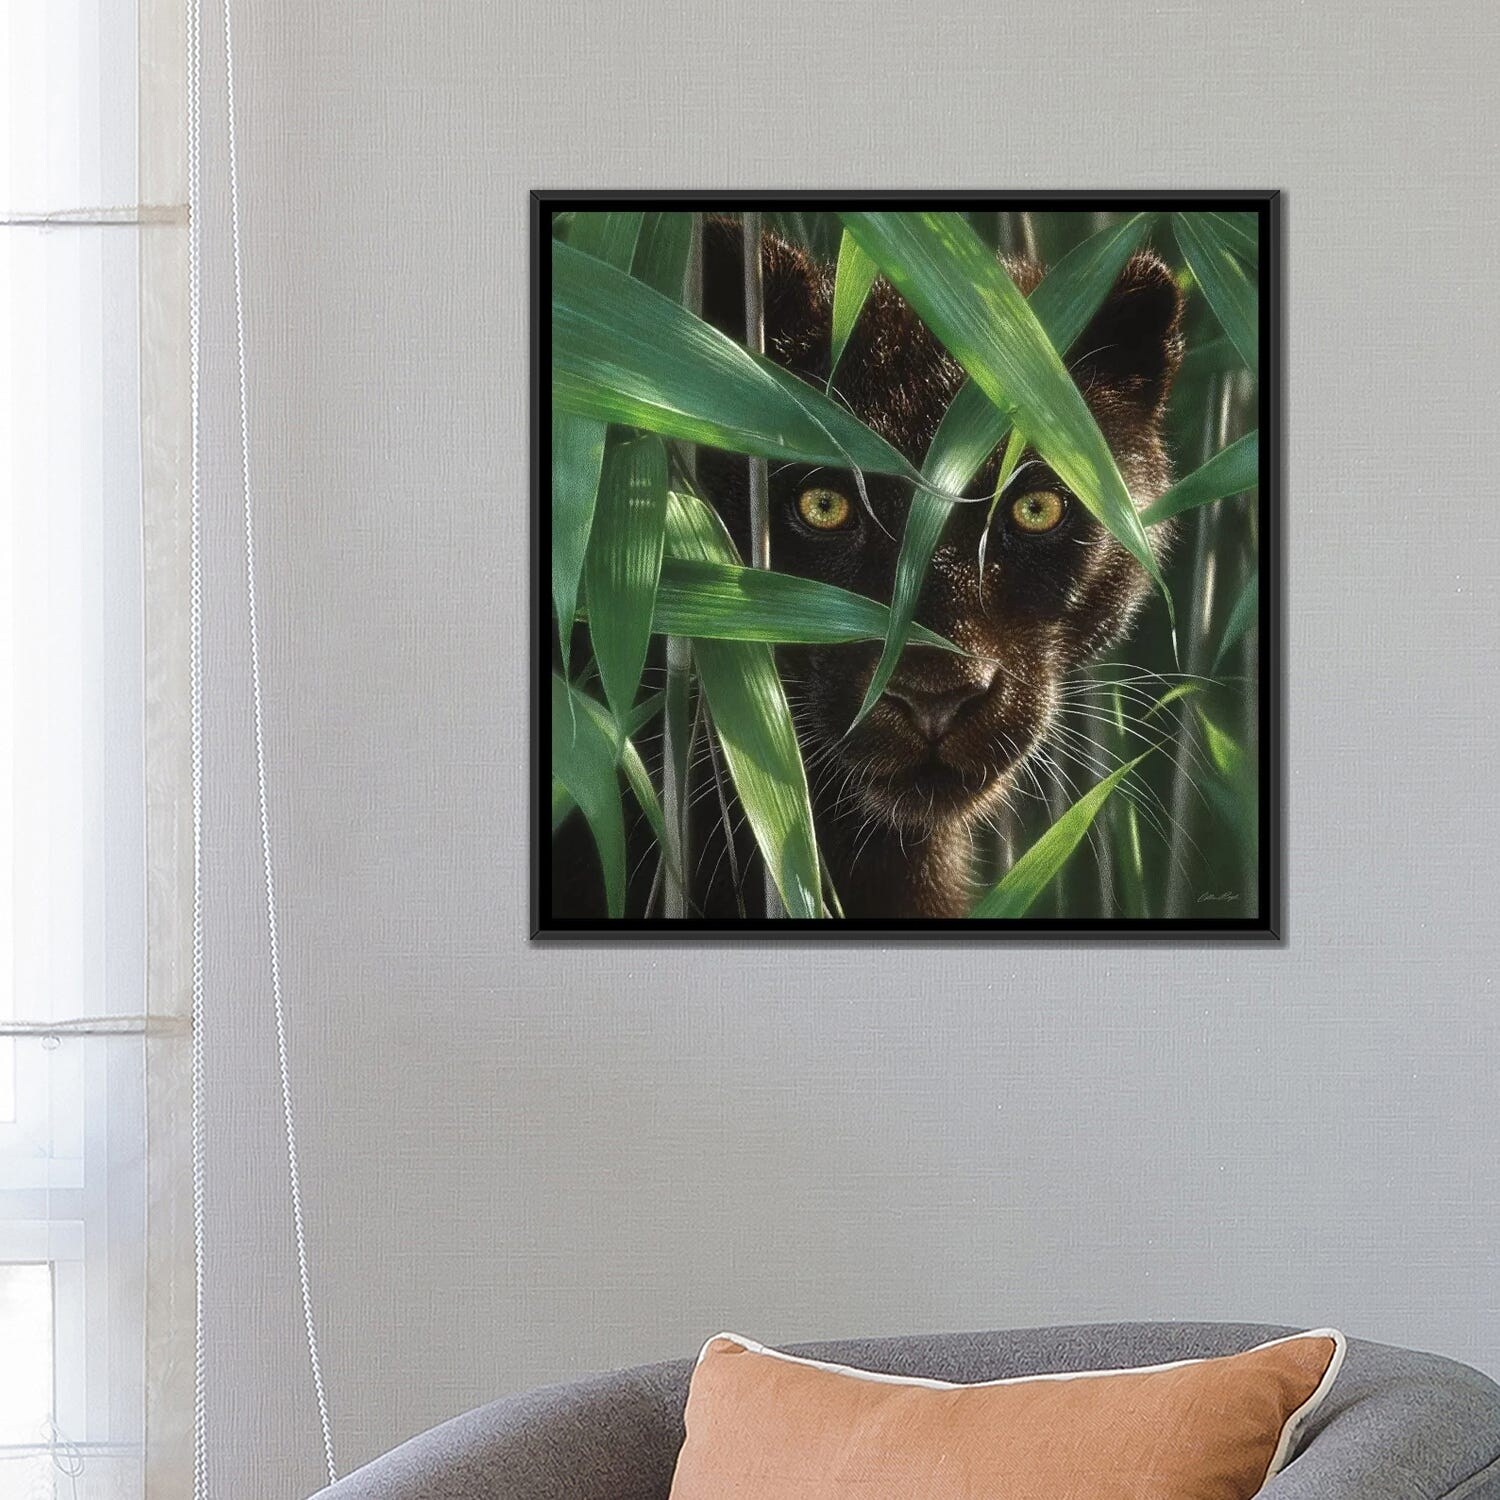 Tiger - Emerald Forest Canvas Wall Art by Collin Bogle